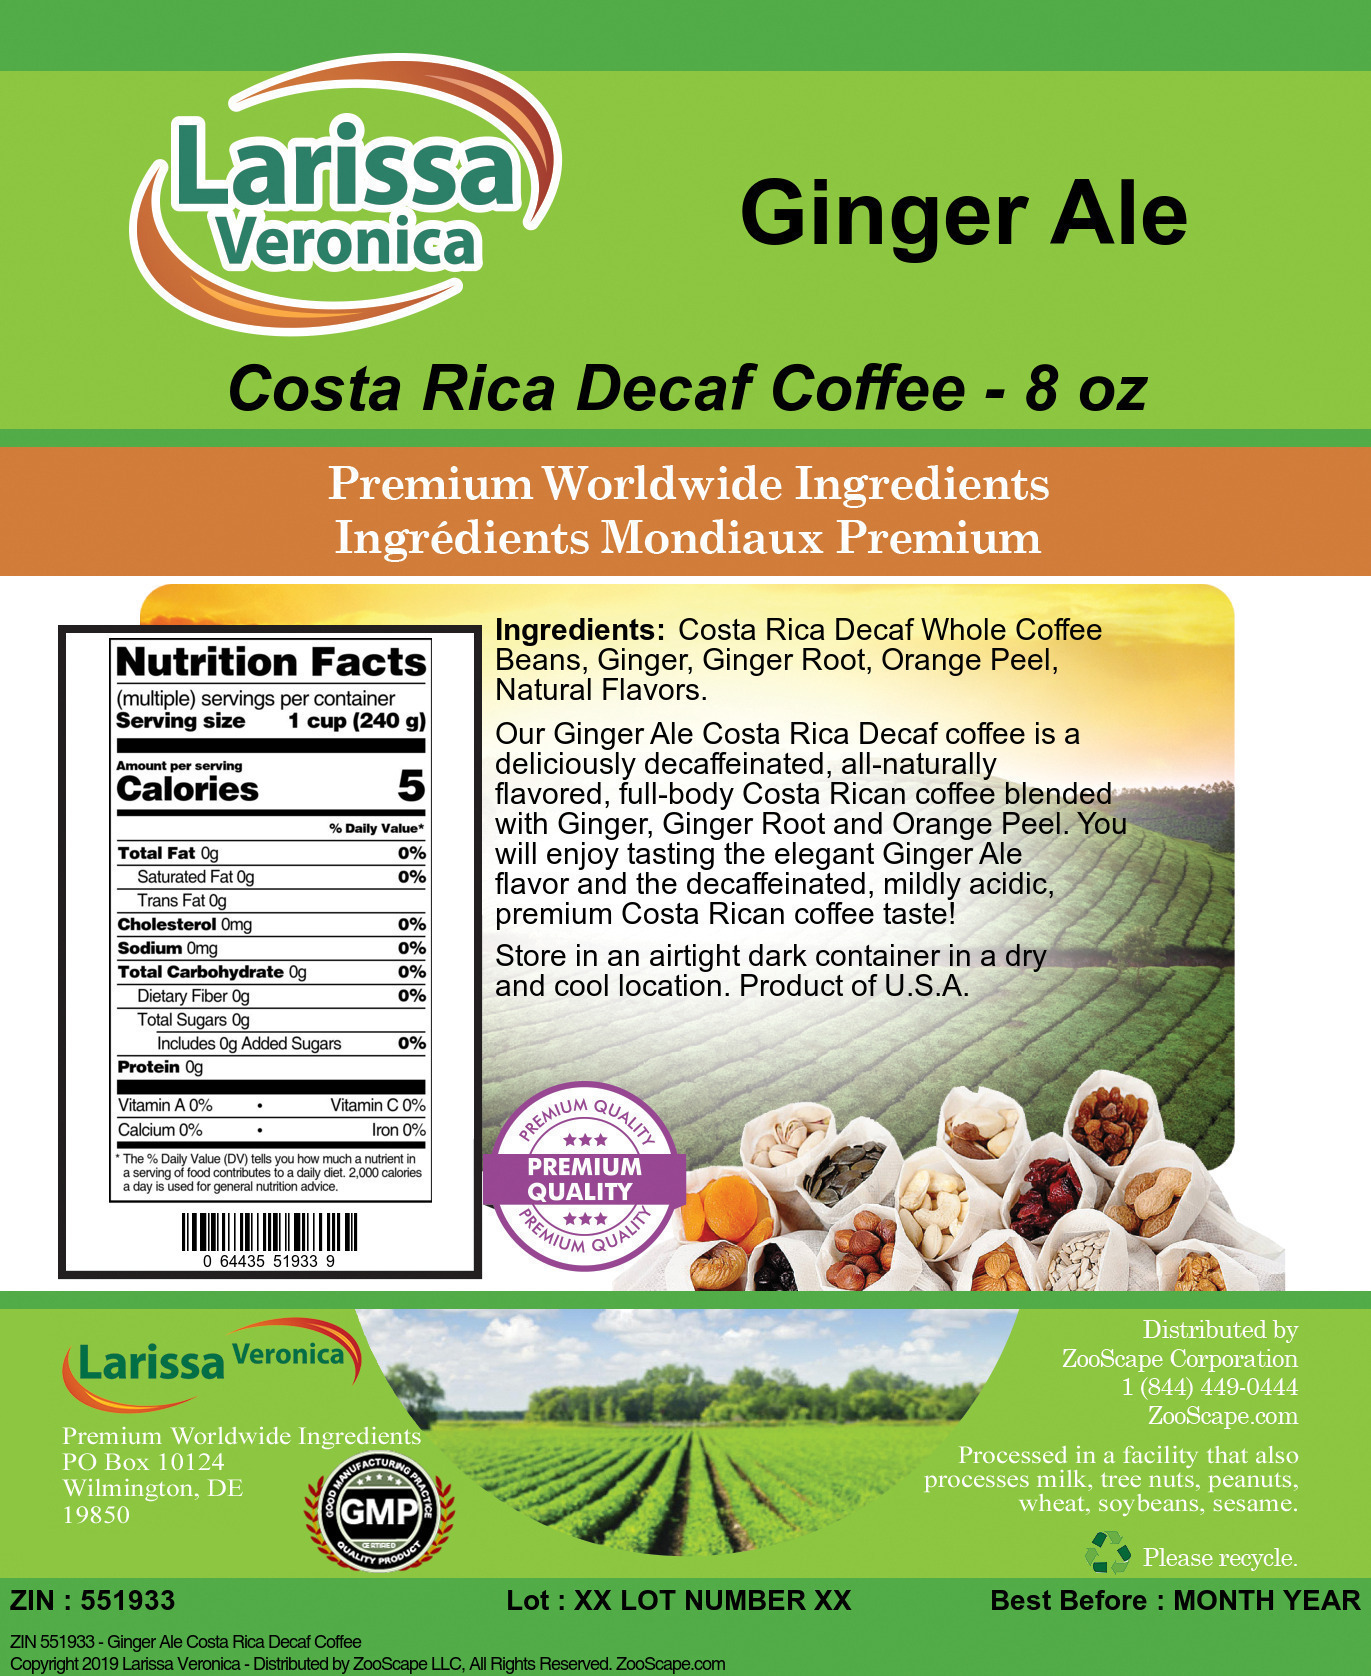 Ginger Ale Costa Rica Decaf Coffee - Label